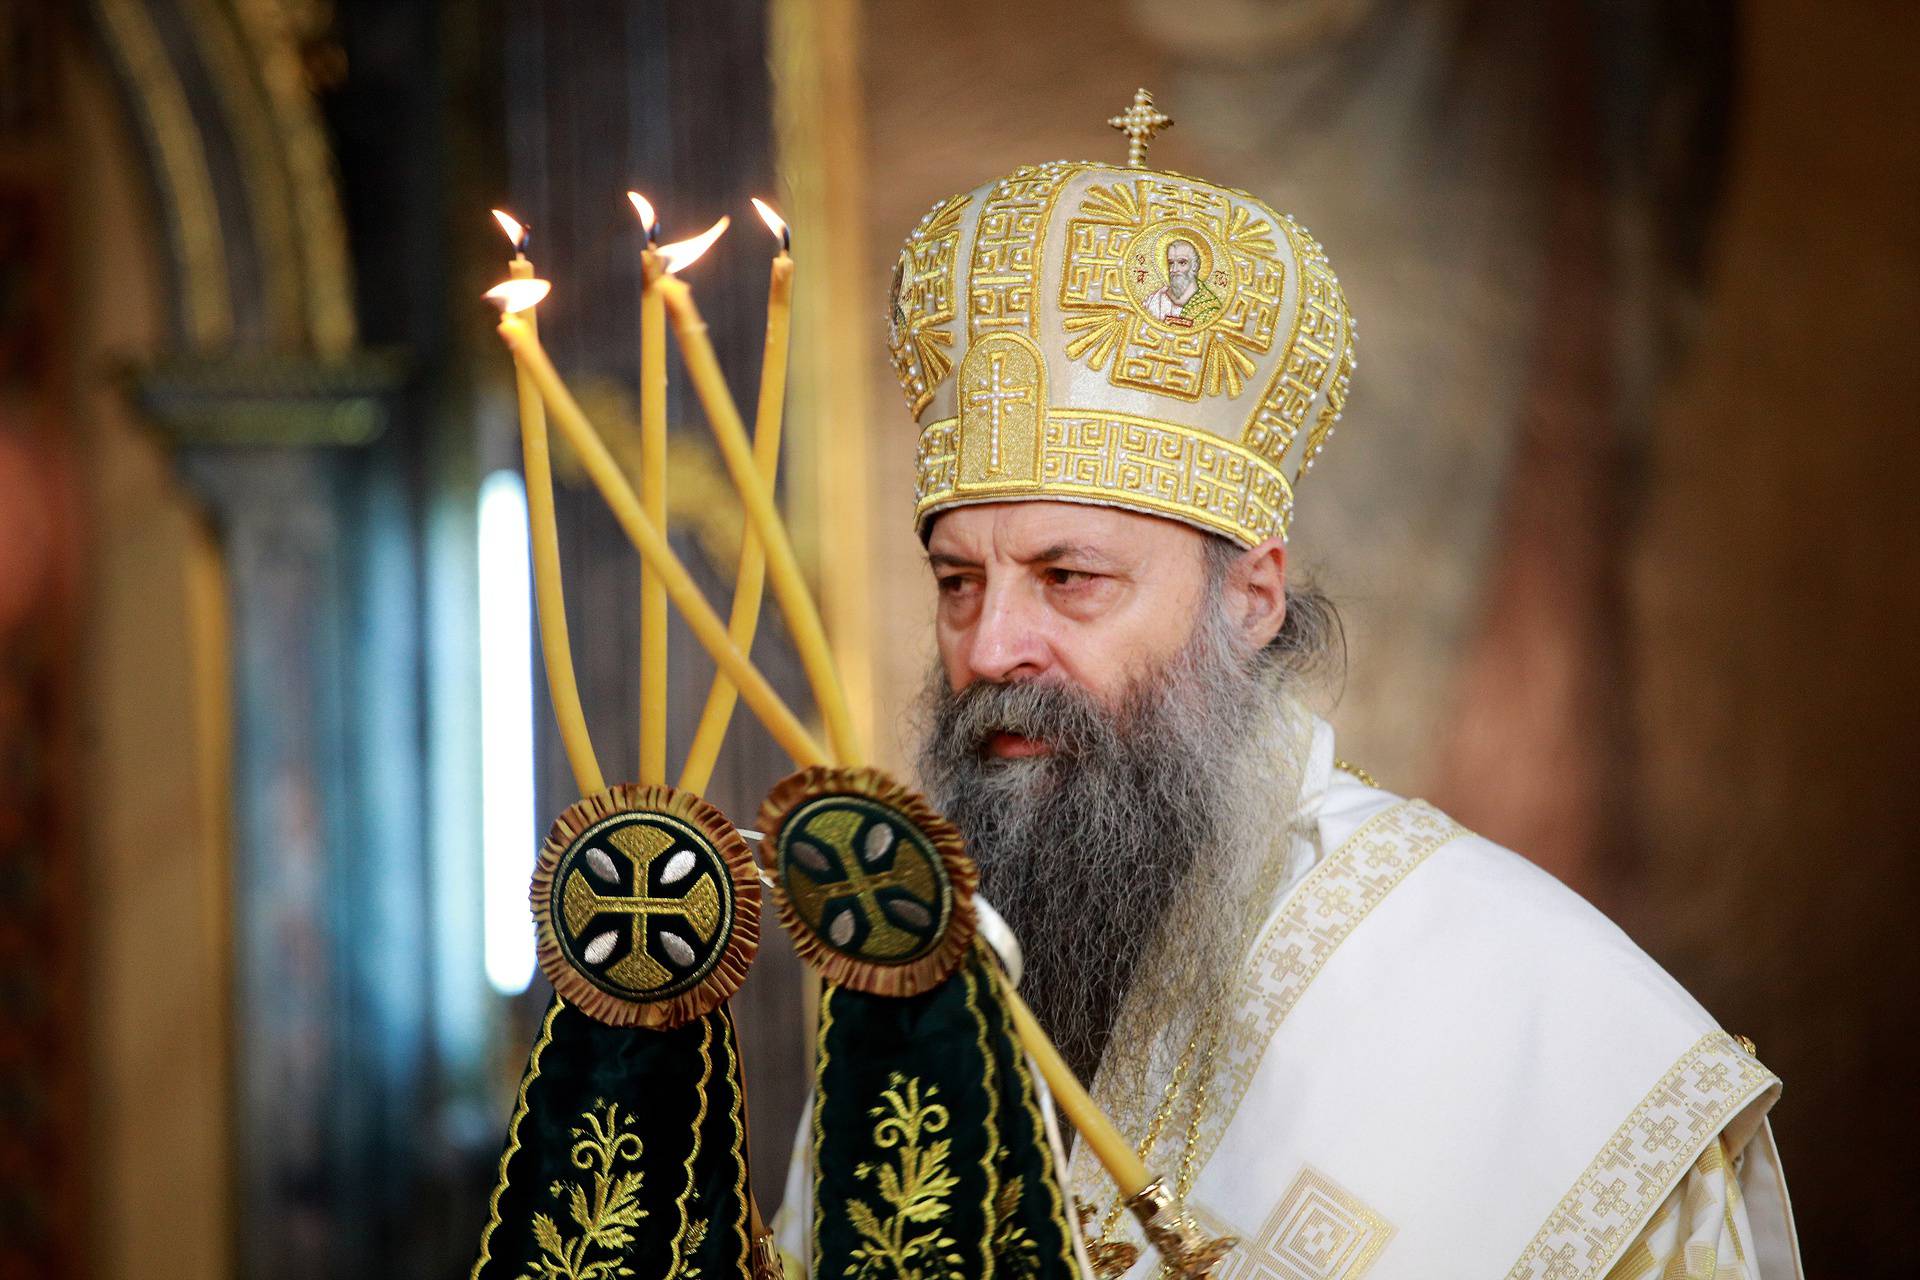 The liturgy at which the solemn act of enthronement of His Holiness Porfirije in the holiest throne of the Archbishop of Pec, Metropolitan of Belgrade and Karlovac and Patriarch of Serbia was performed was served in the Cathedral.

Liturgija na kojoj je i